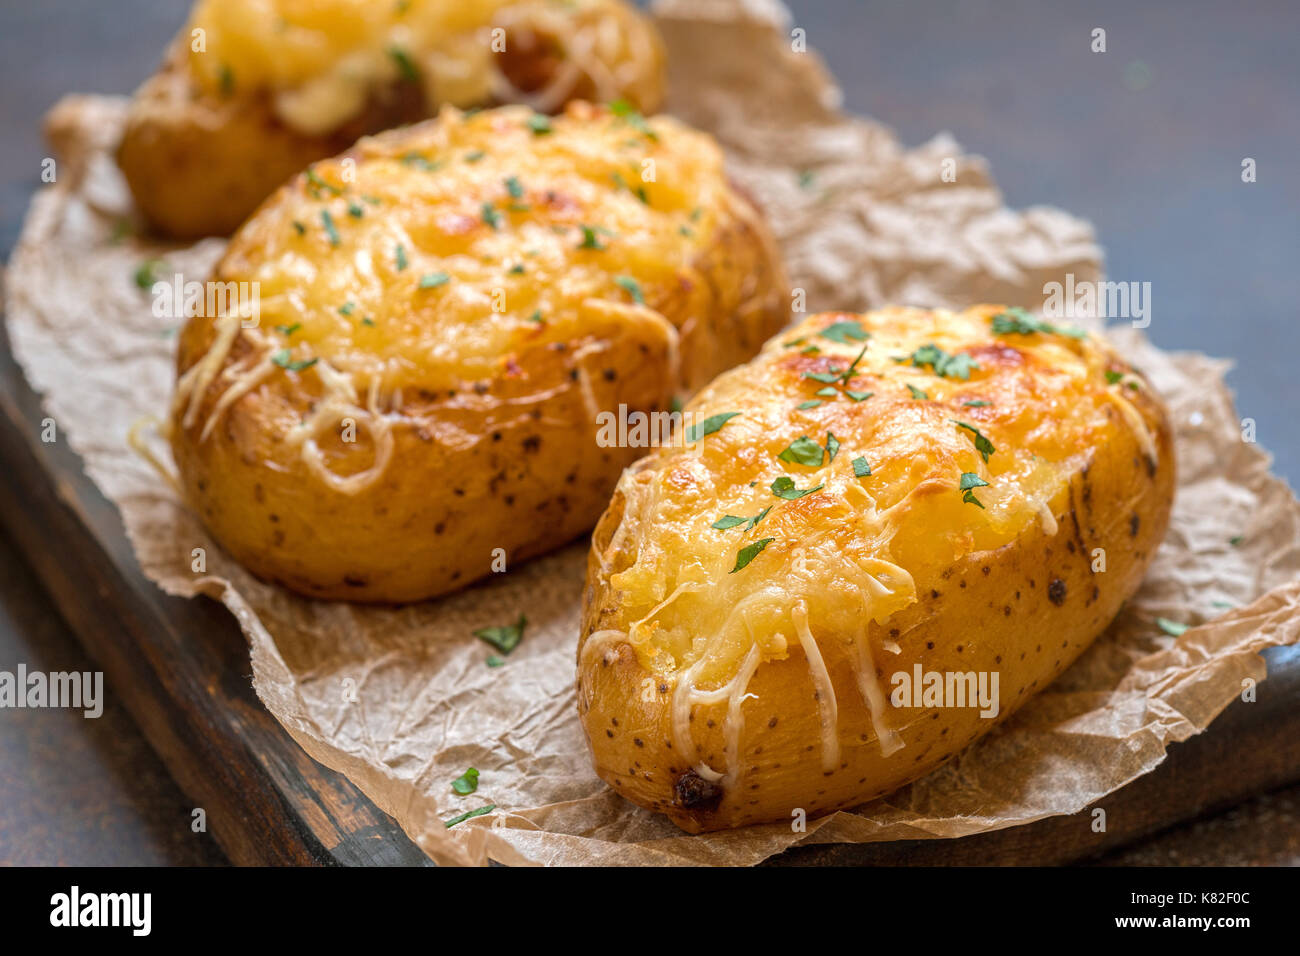 Baked loaded potato with bacon, cheese and onion Stock Photo